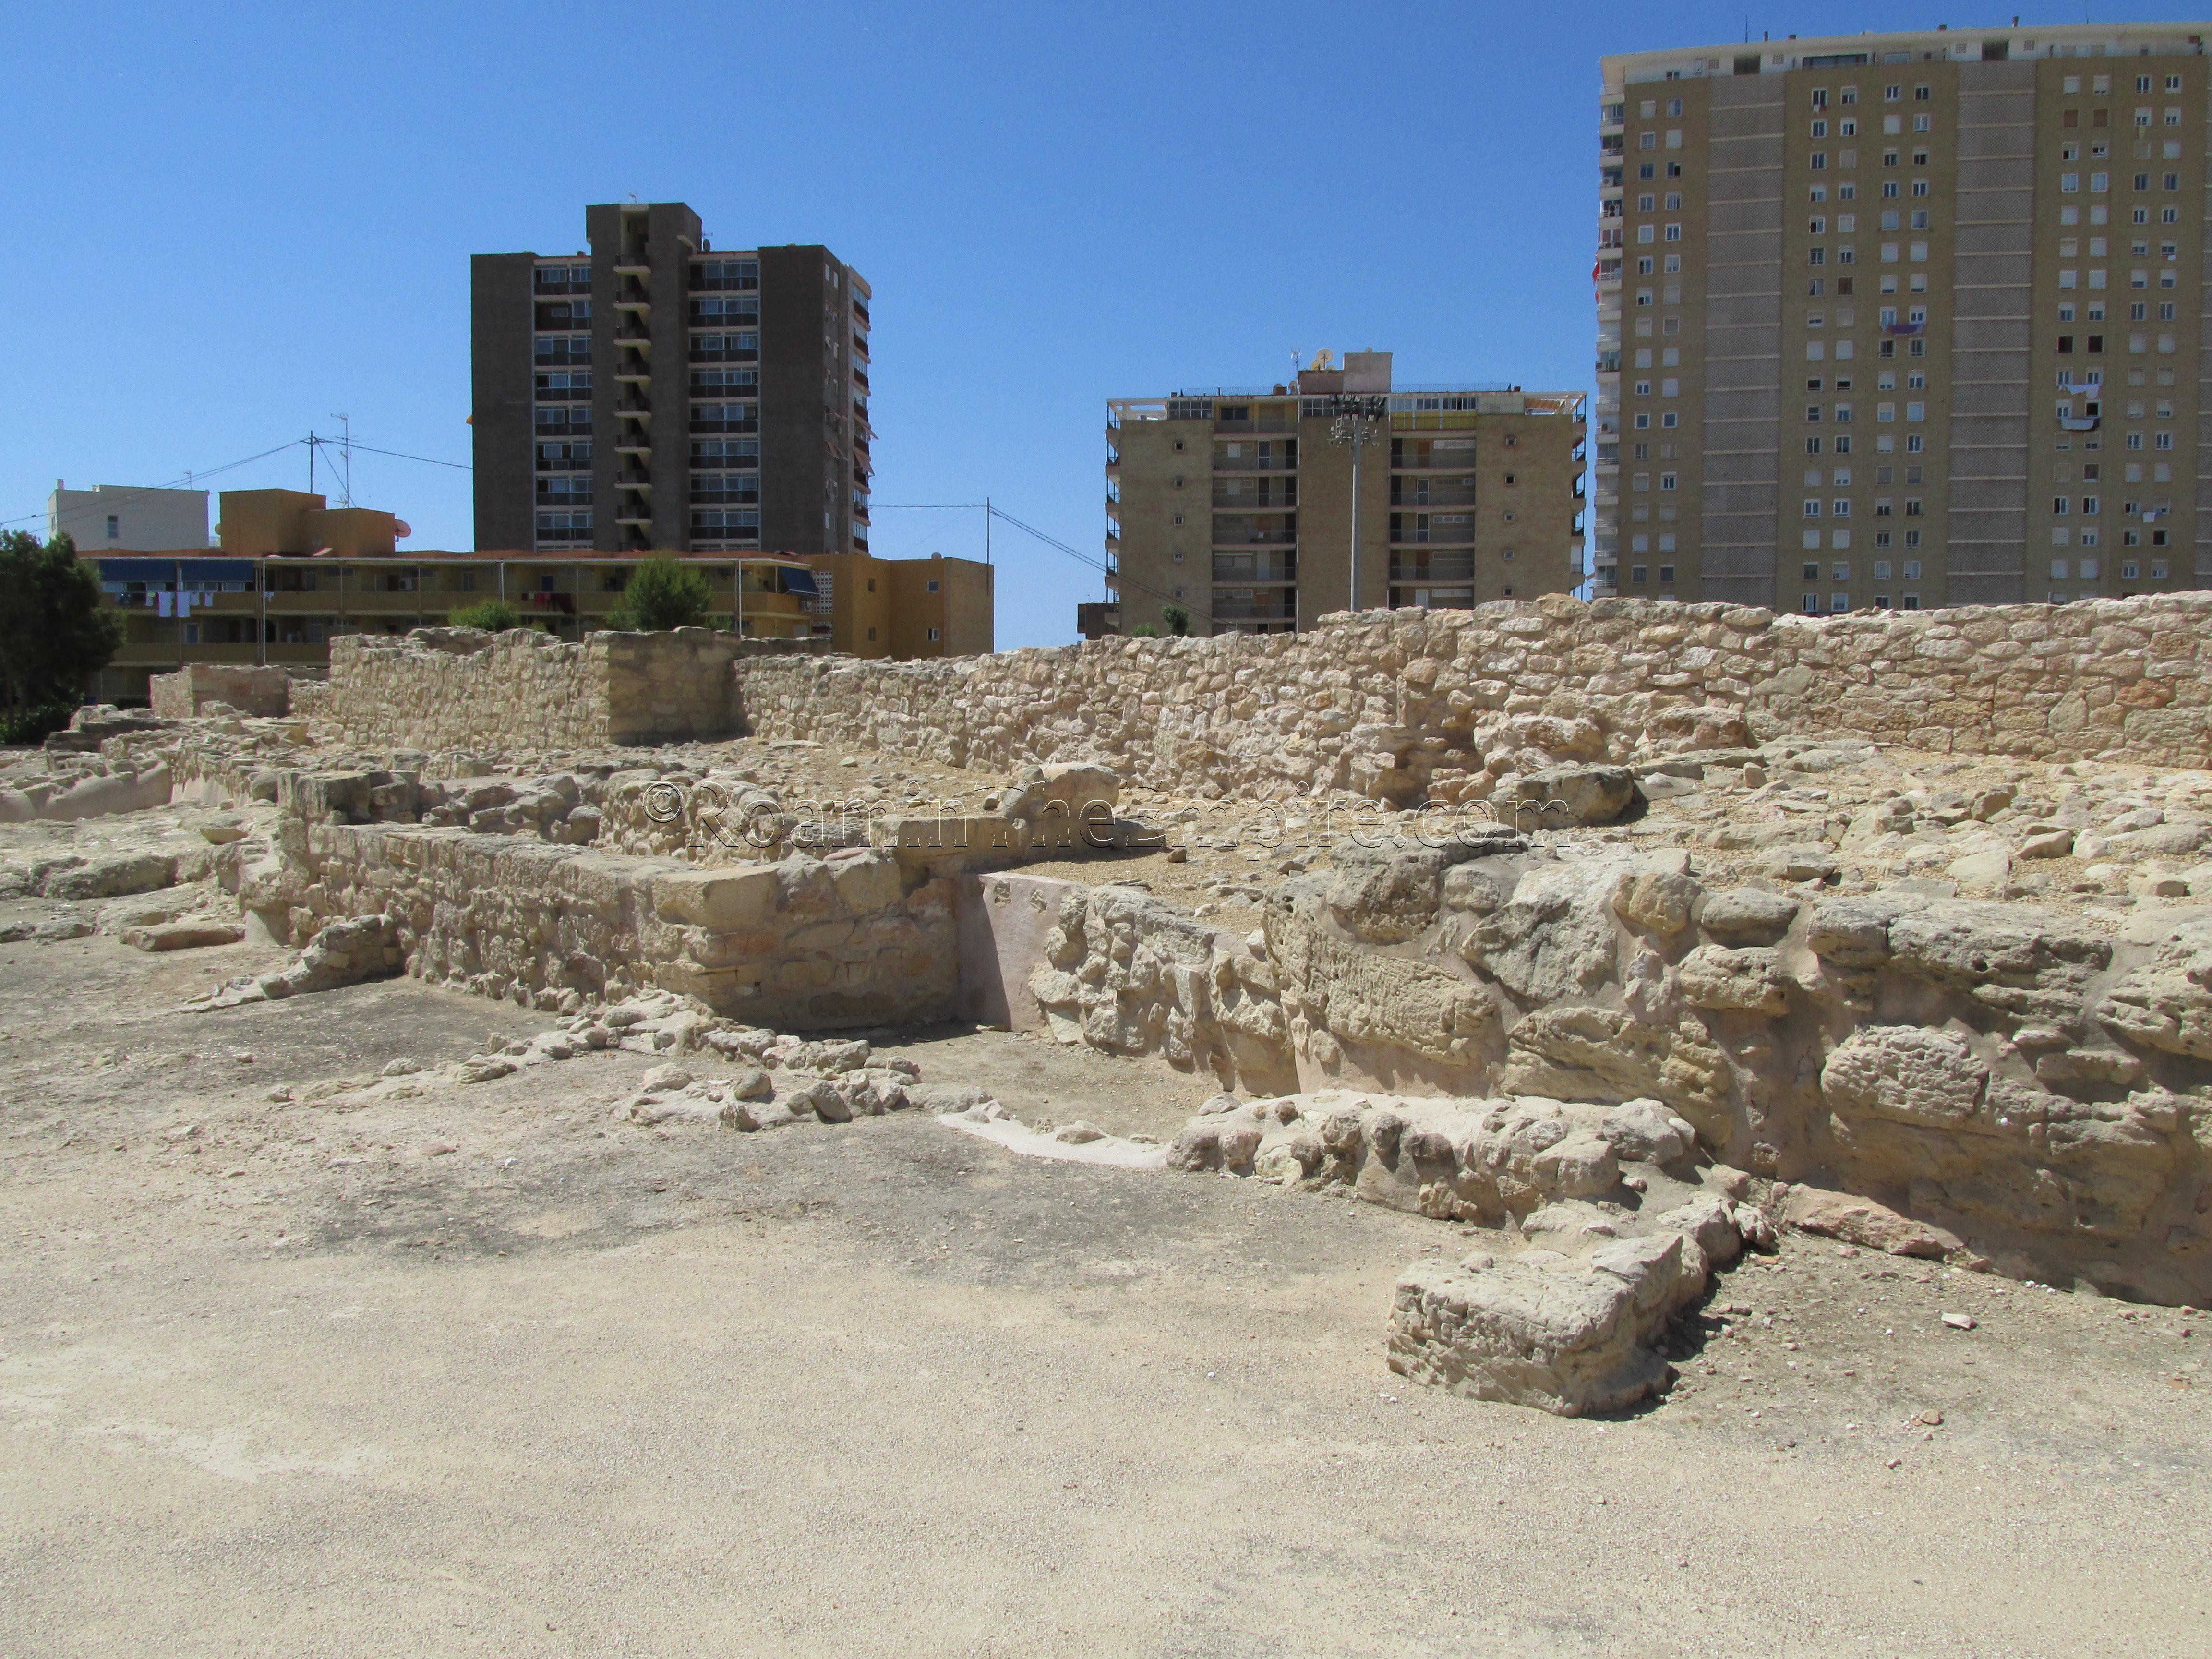 East wall of Lucentum.